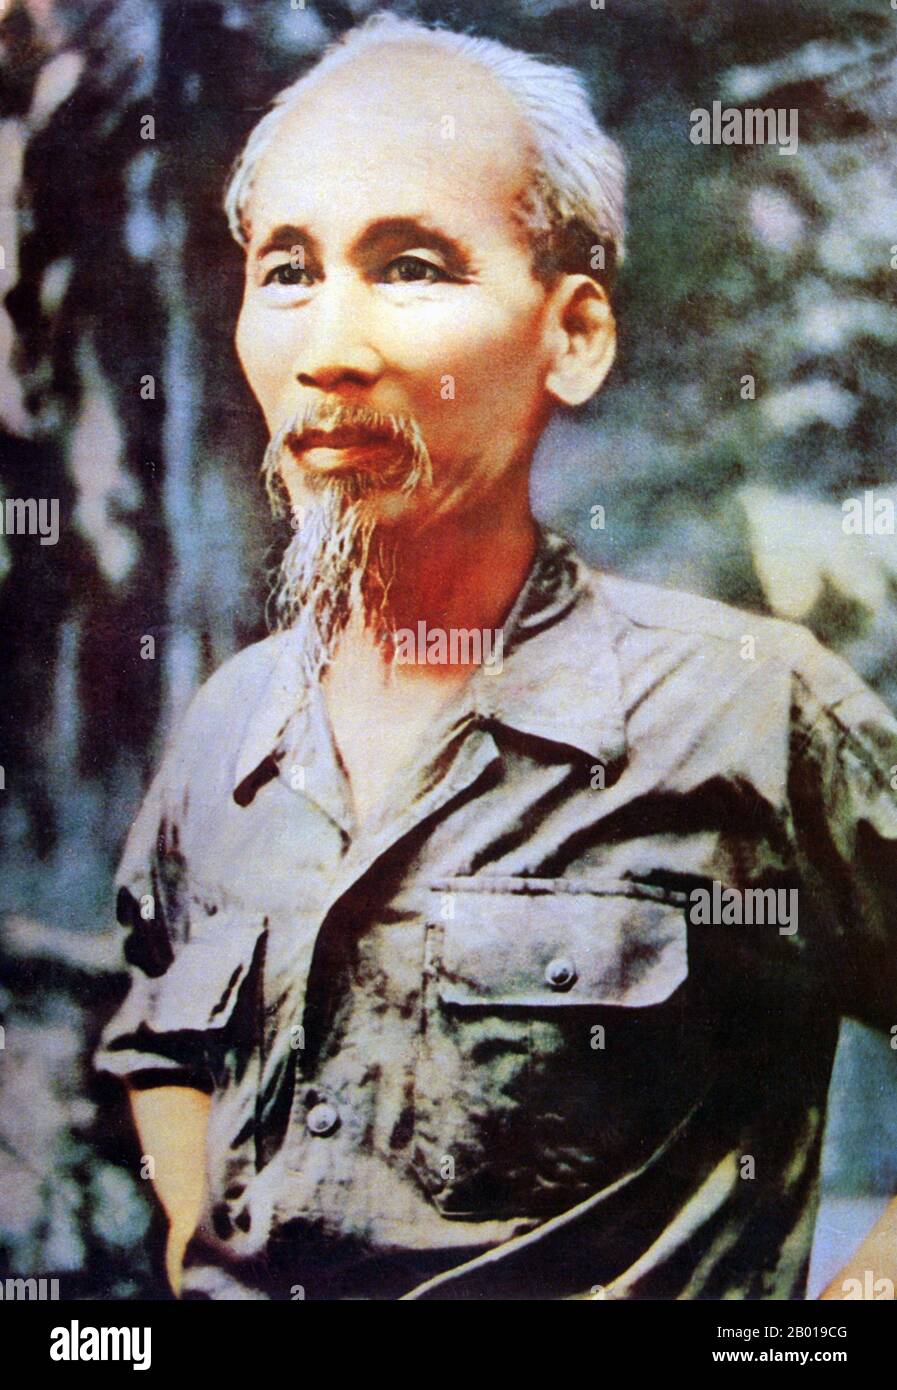 Vietnam: Ho Chi Minh (19 May 1890 - 3 September 1969) after the Vietnamese victory at Dien Bien Phu, 1954.  Hồ Chí Minh, born Nguyễn Sinh Cung and also known as Nguyễn Ái Quốc was a Vietnamese Communist revolutionary leader who was prime minister (1946-1955) and president (1945-1969) of the Democratic Republic of Vietnam (North Vietnam). He formed the Democratic Republic of Vietnam and led the Viet Cong during the Vietnam War until his death. Stock Photo